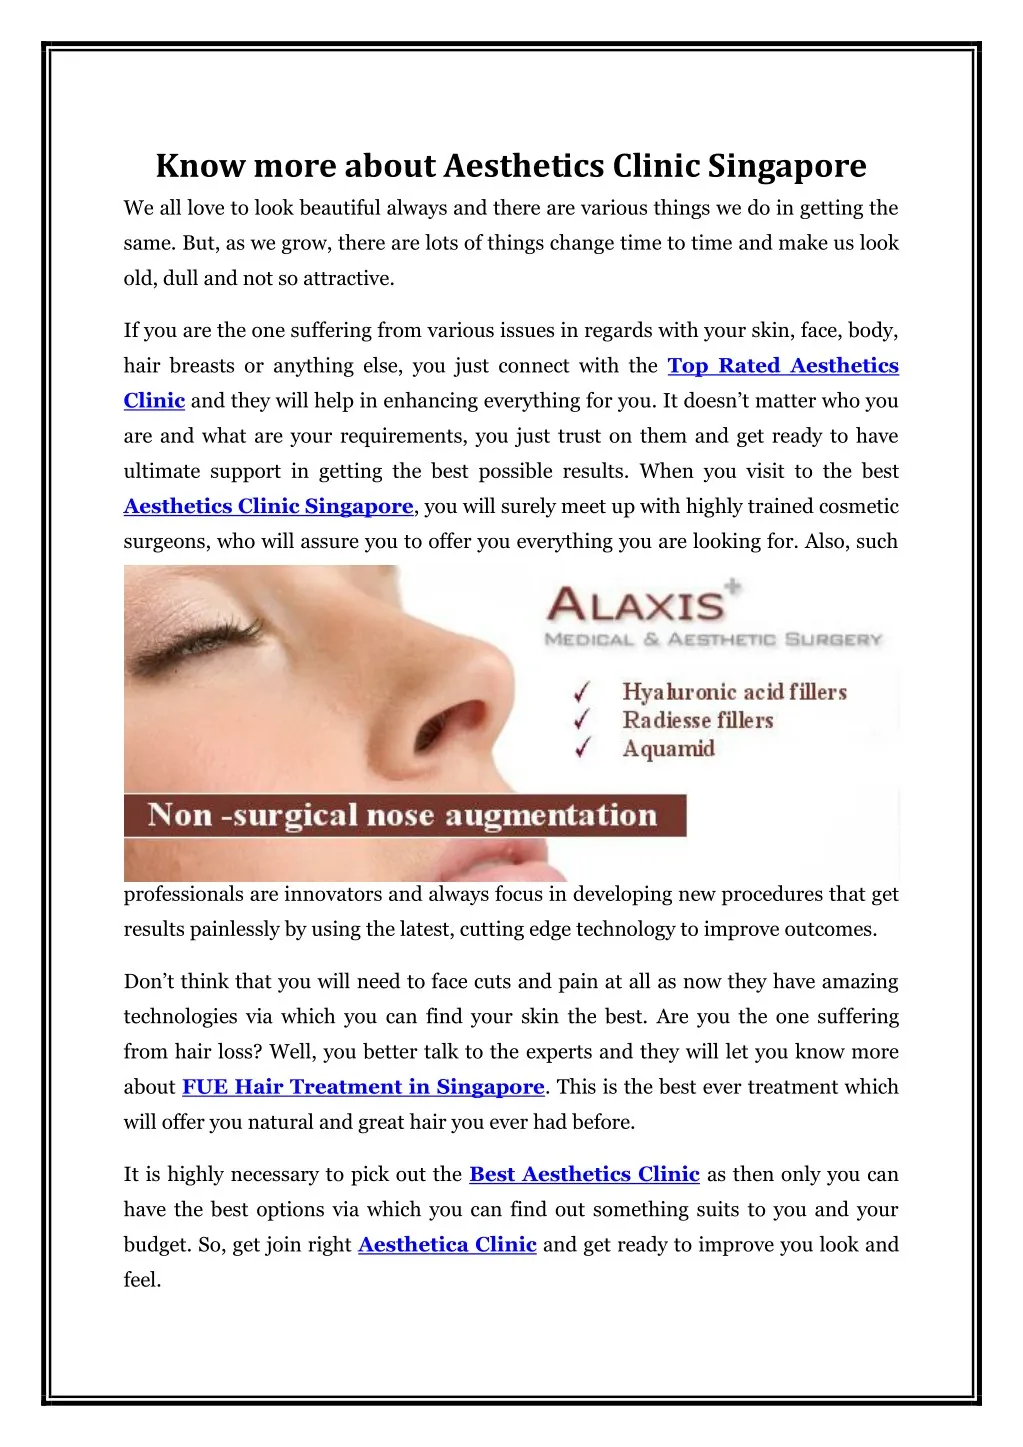 know more about aesthetics clinic singapore